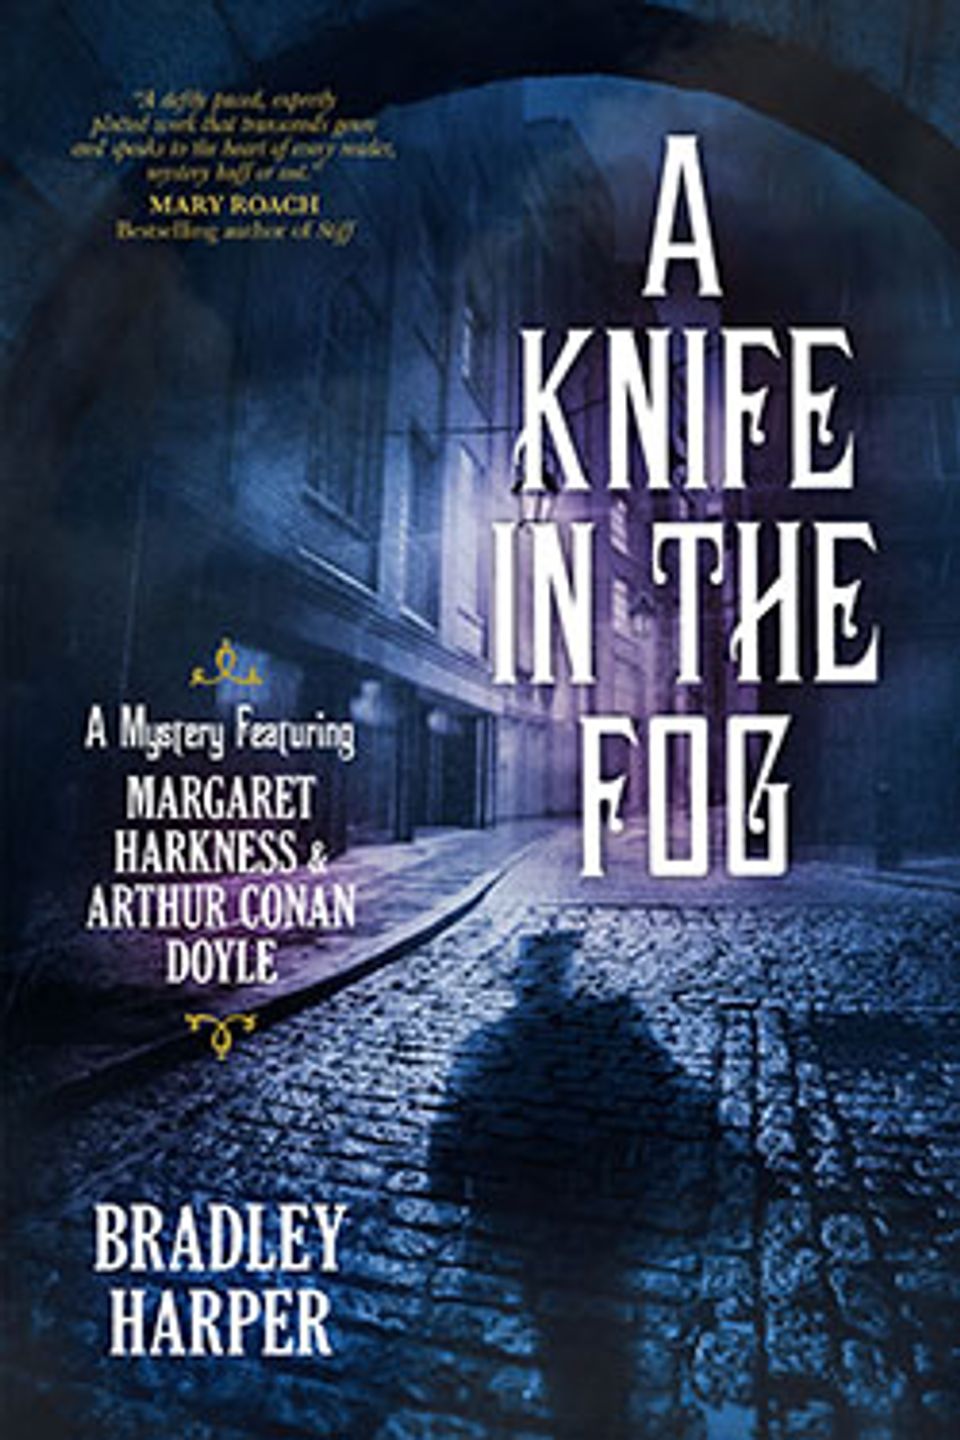 Knife in the fog cover